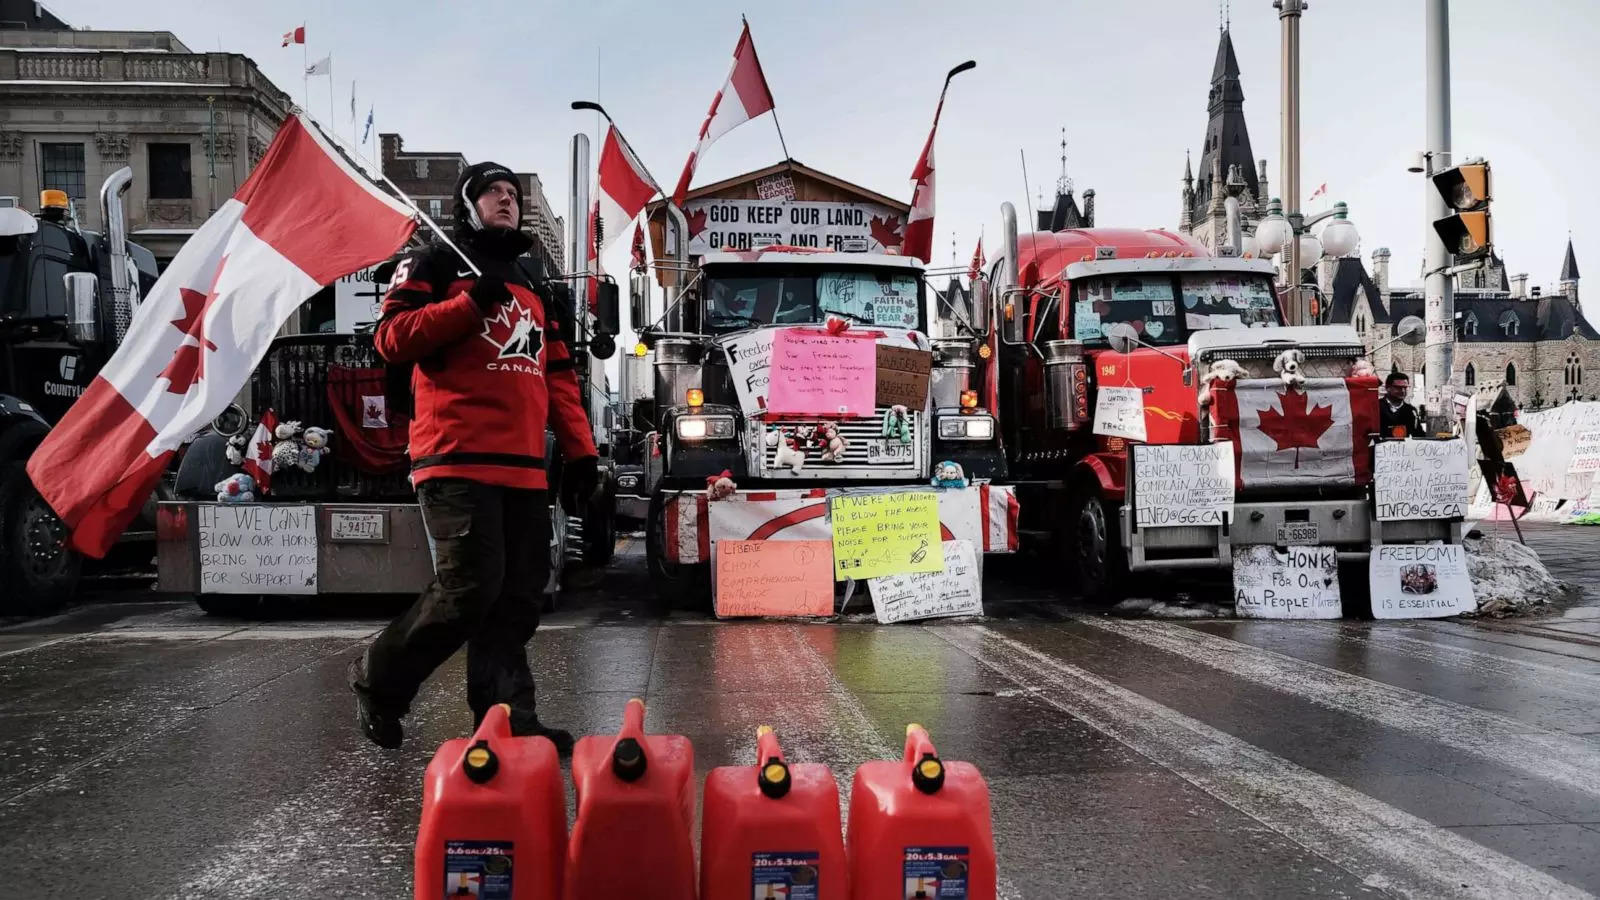  The bridge has been essentially off-line since Monday night as a two-week uprising led by truckers protesting against coronavirus restrictions has spread from the Canadian capital.